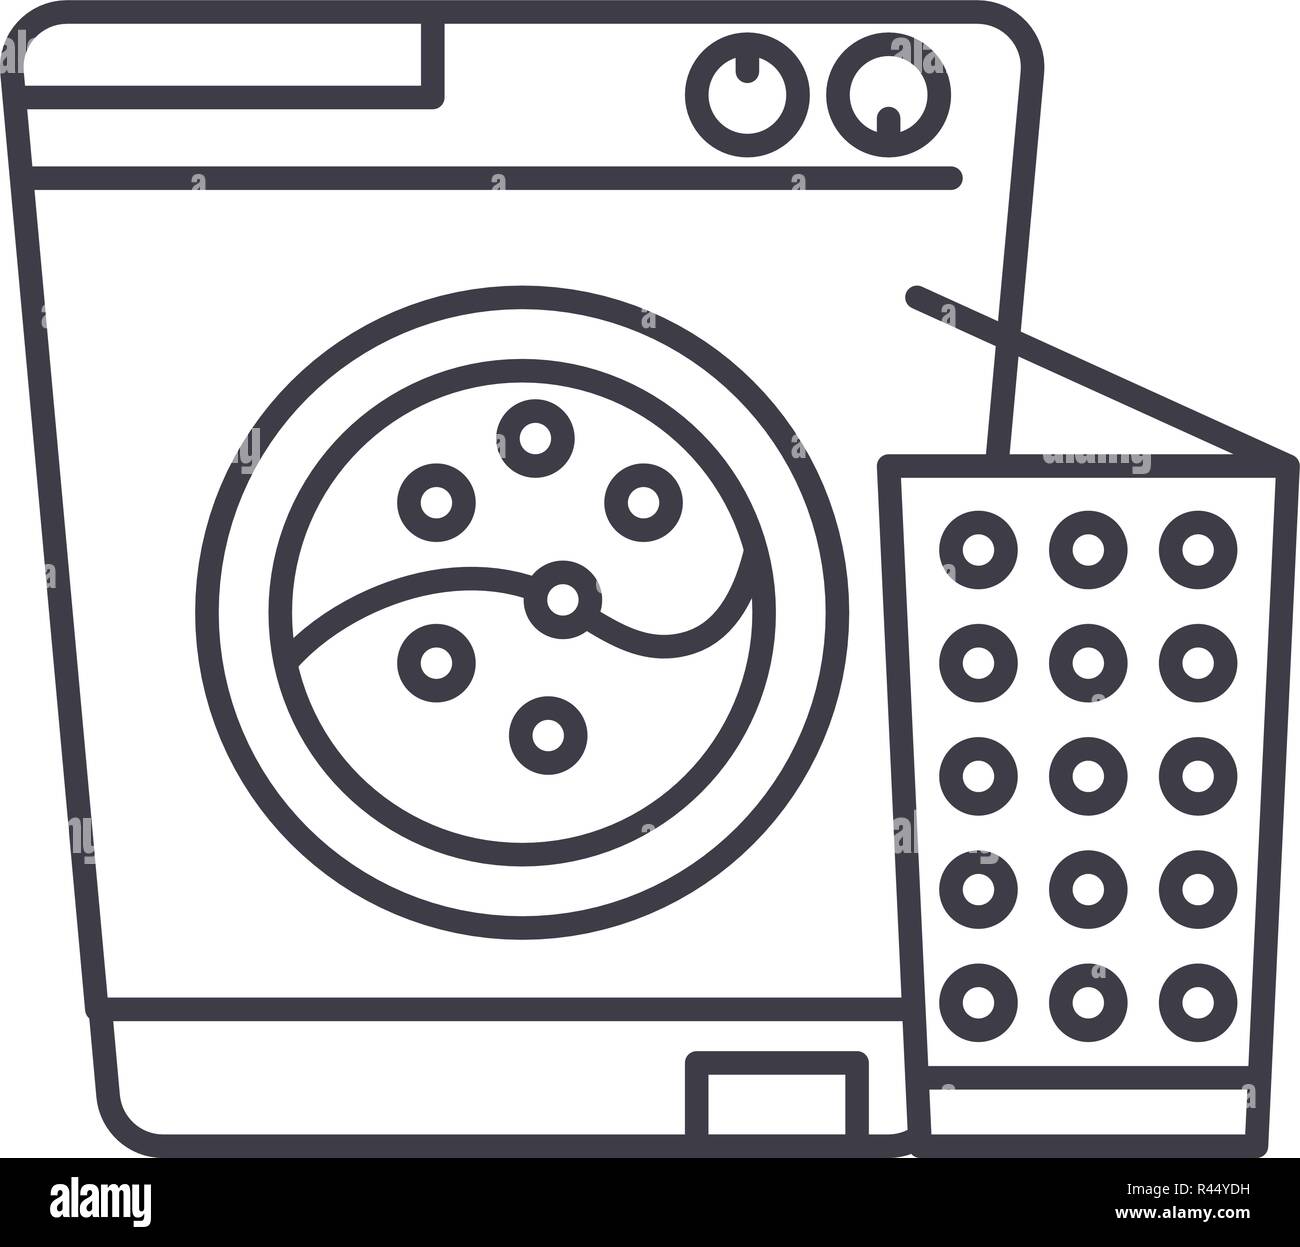 Washer line icon concept. Washer vector linear illustration, symbol, sign Stock Vector